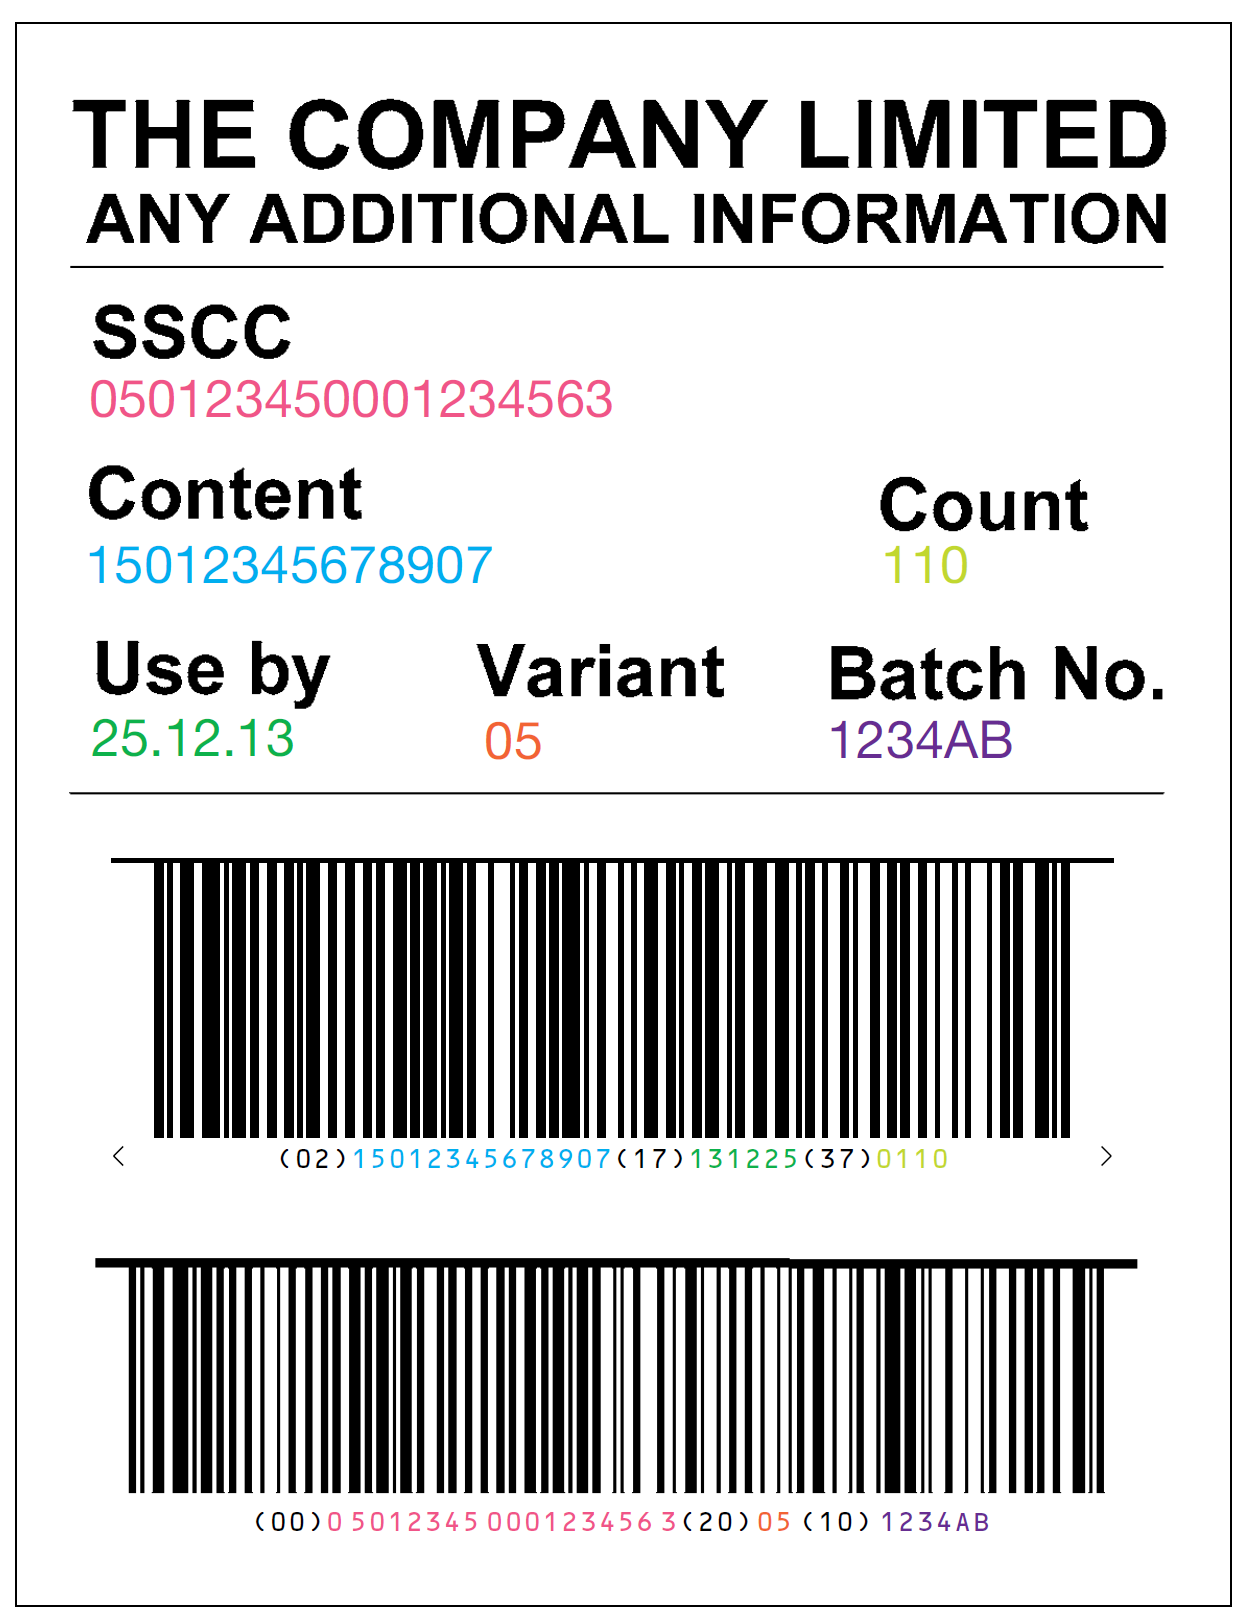 How to create logistics labels and Serial Shipping Container Codes (SSCCs)